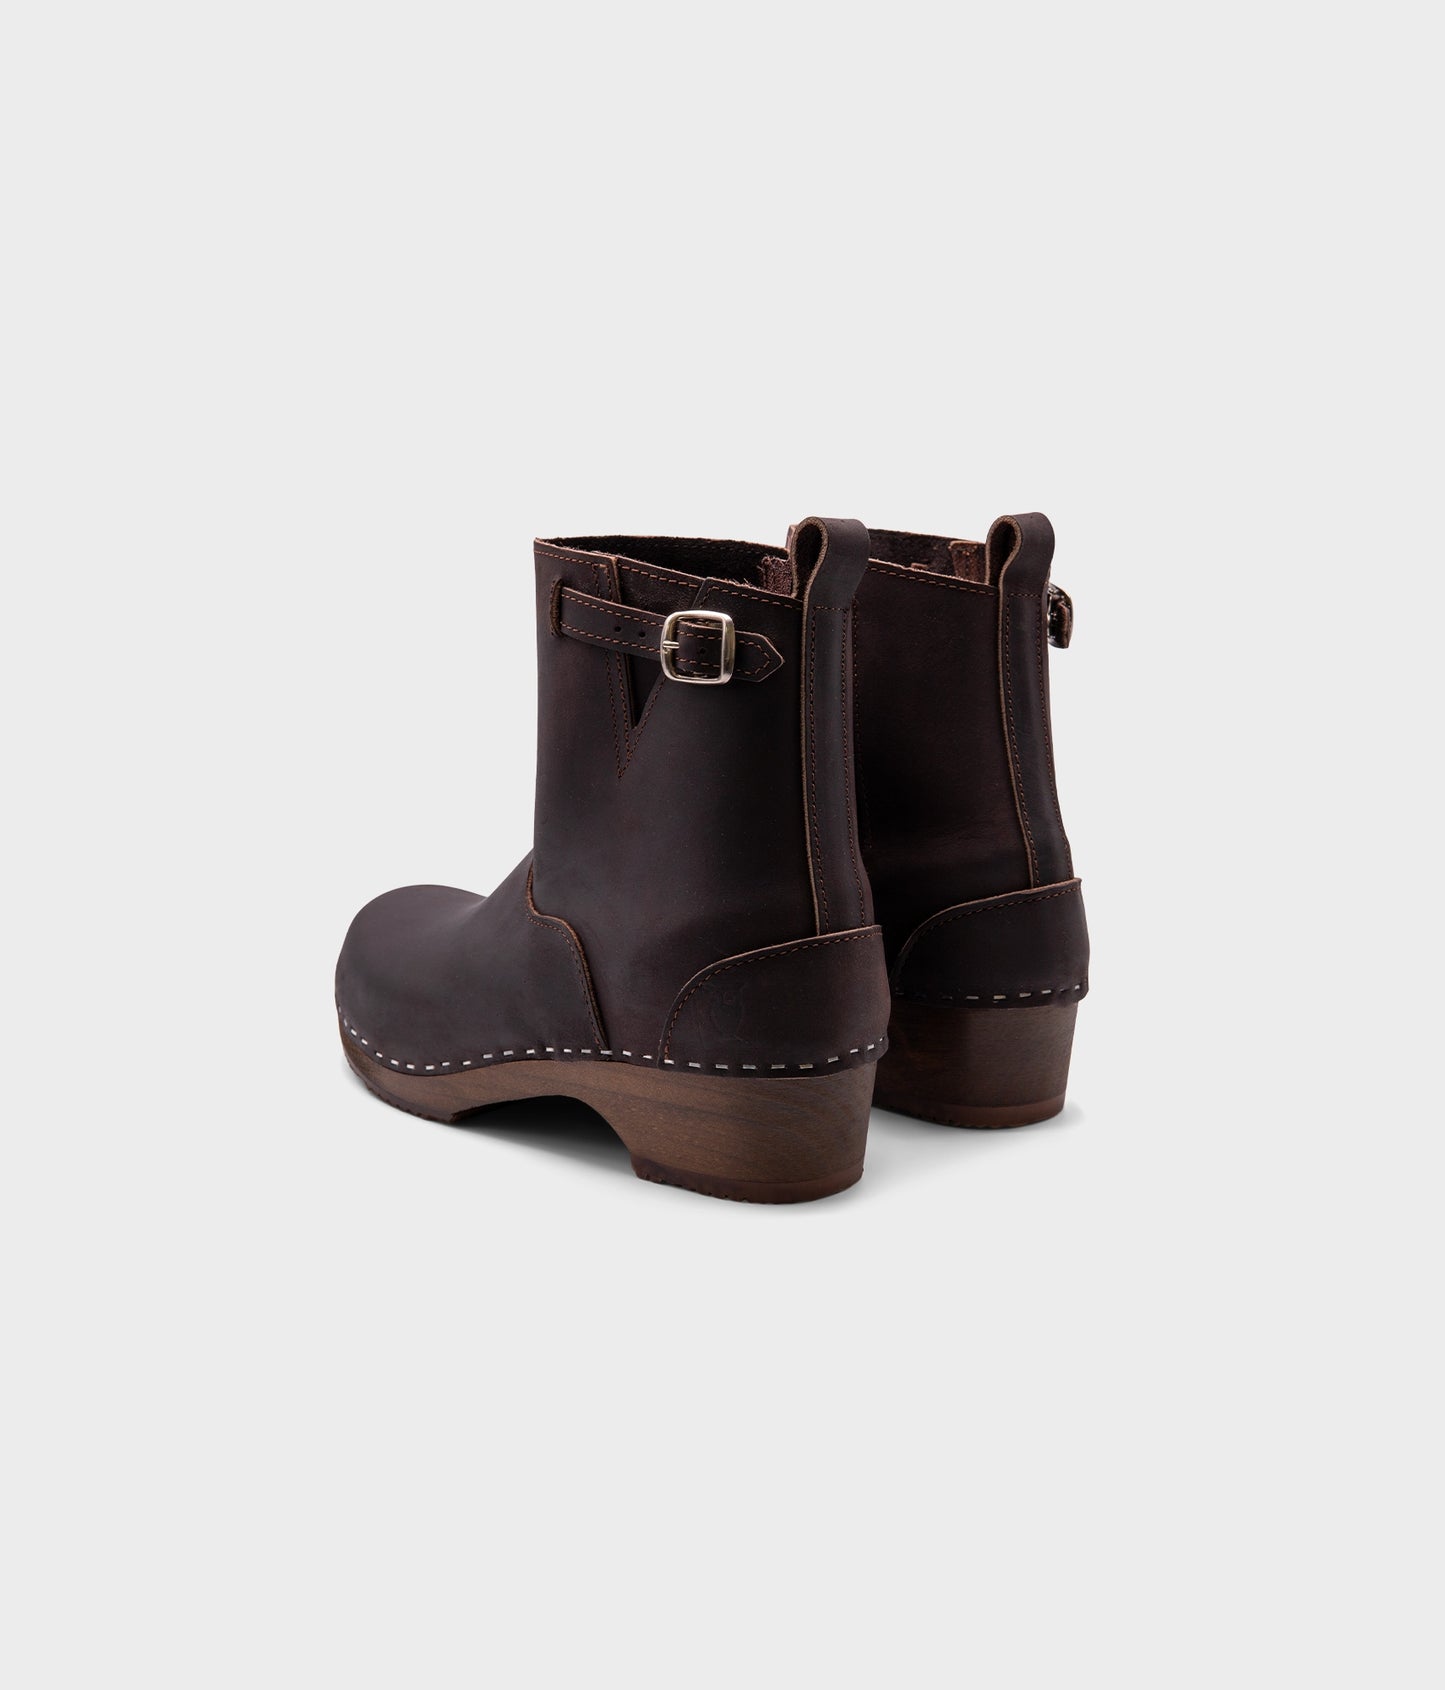 low heeled clog boots in dark brown nubuck leather with a mid-shaft and silver buckle, stapled on a dark wooden base